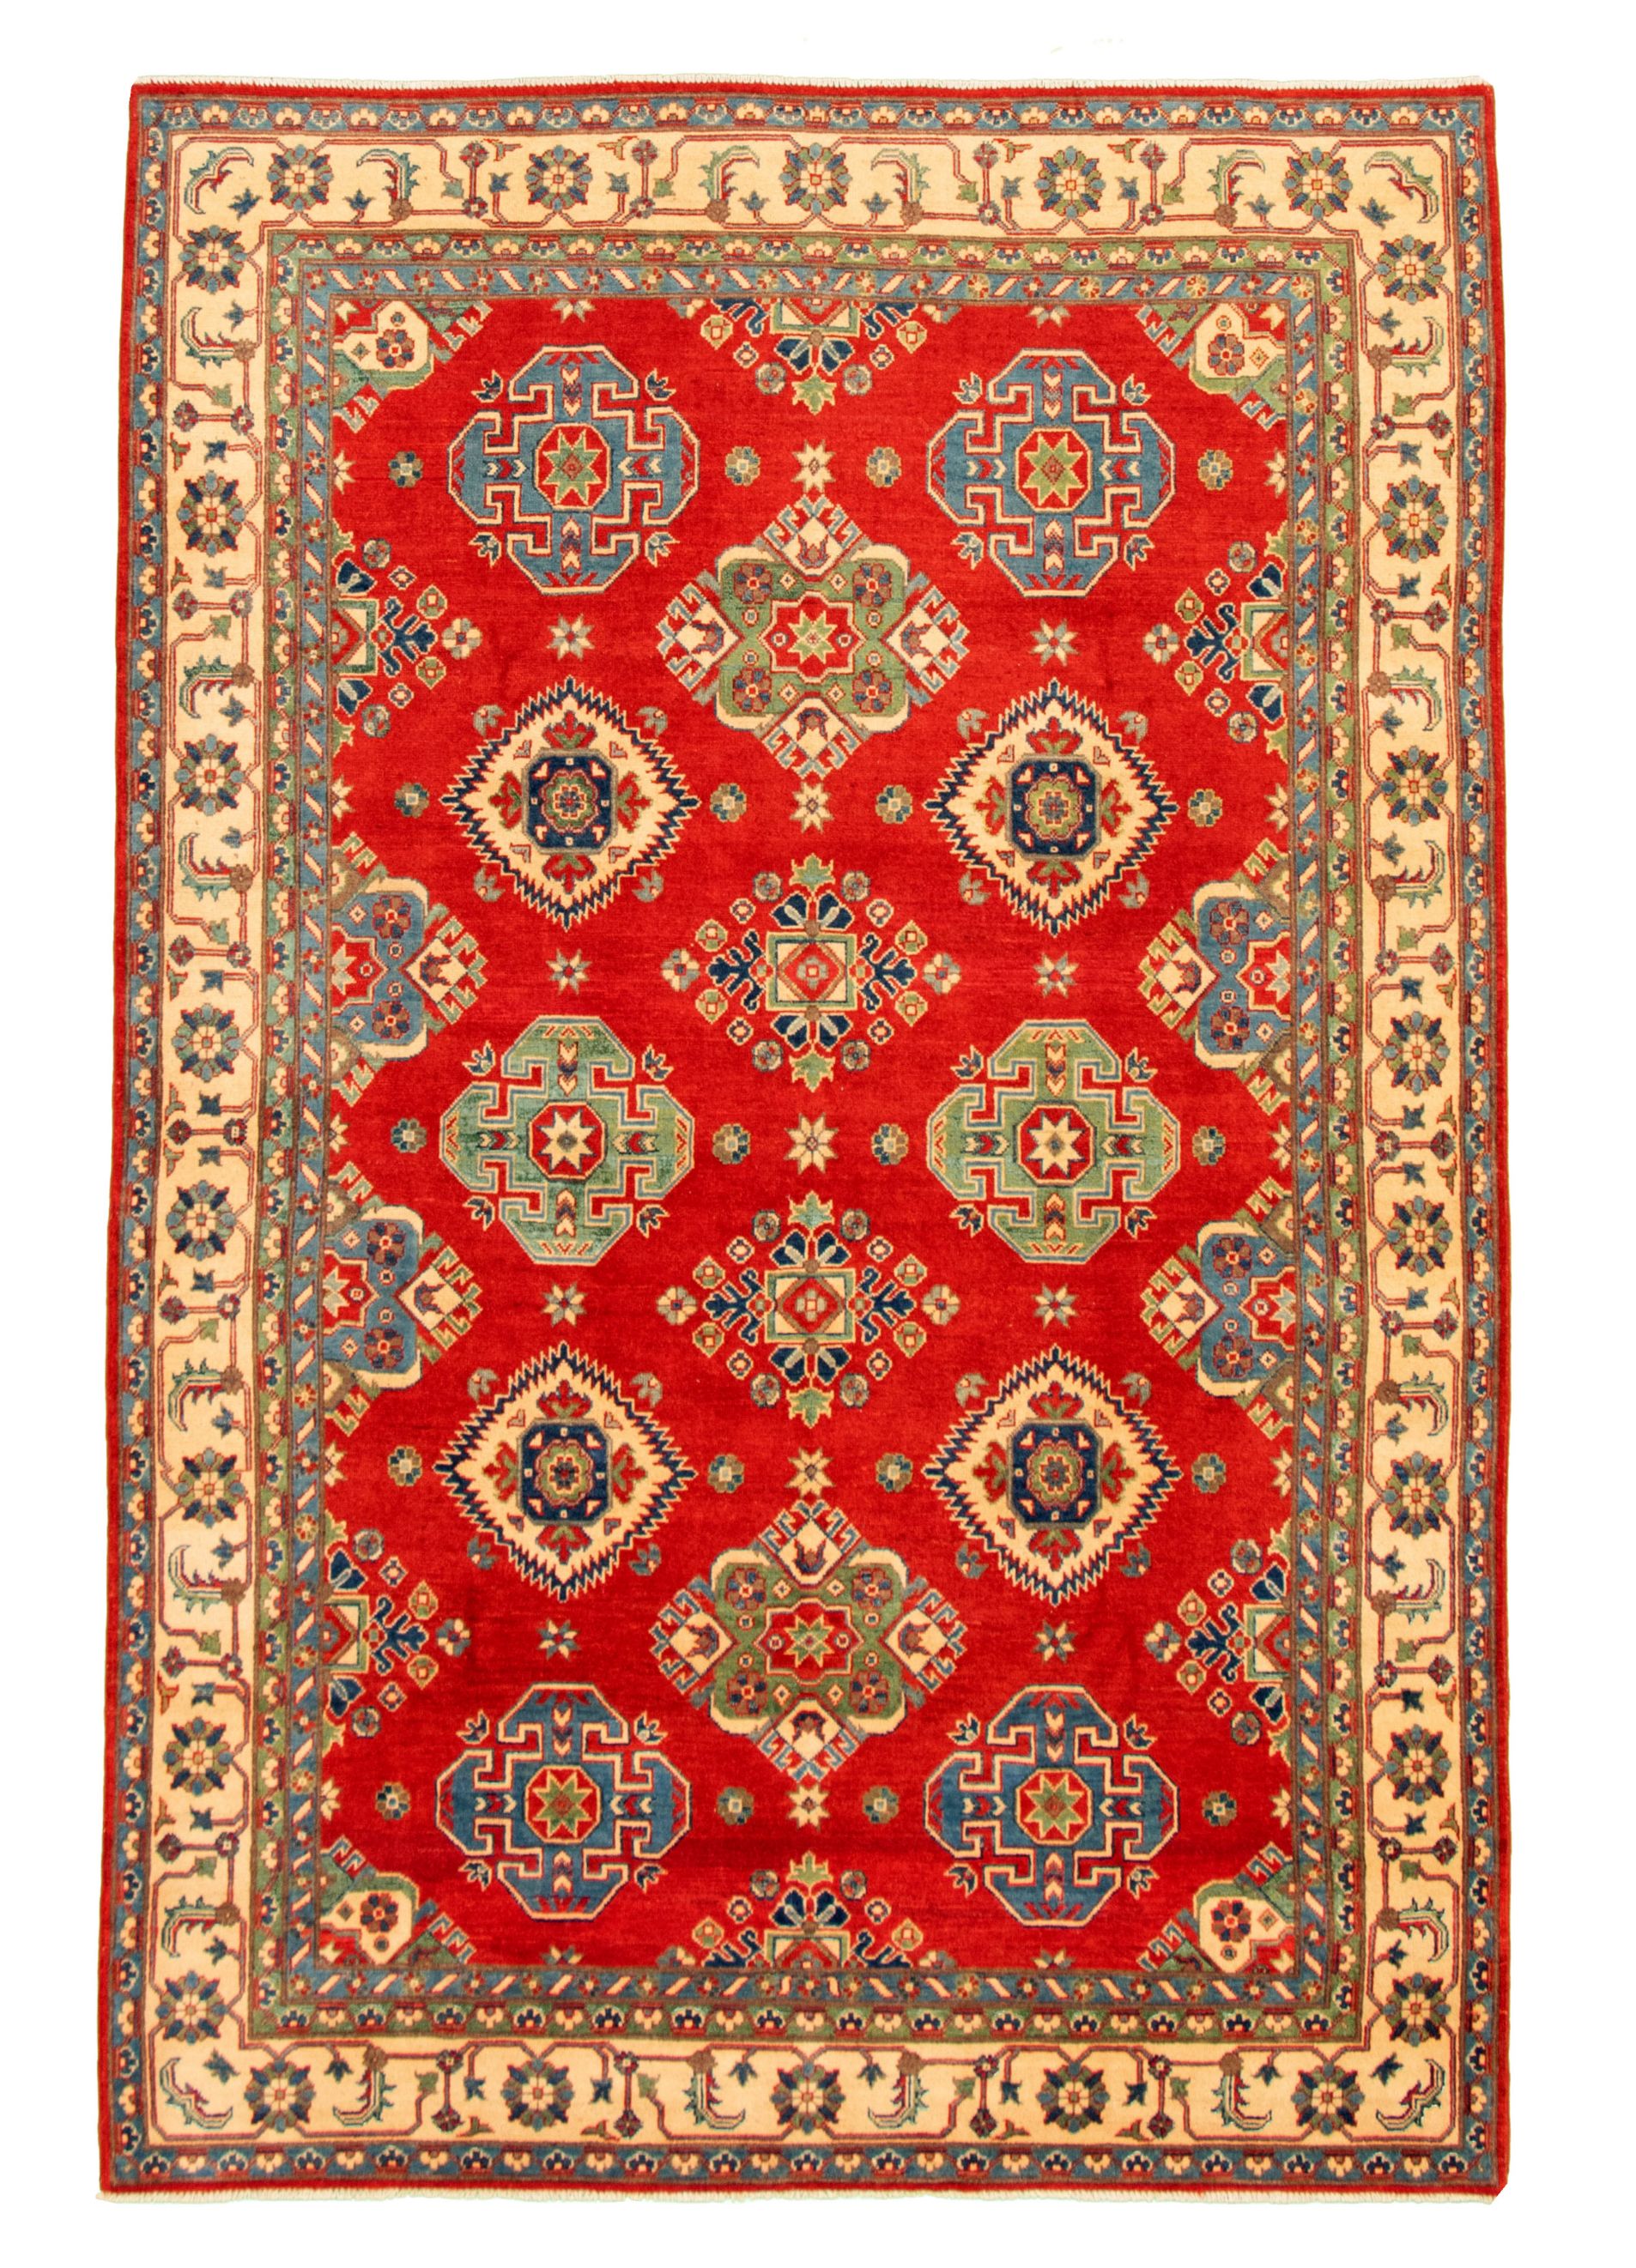 Hand-knotted Finest Gazni Red Wool Rug 6'7" x 9'10"  Size: 6'7" x 9'10"  